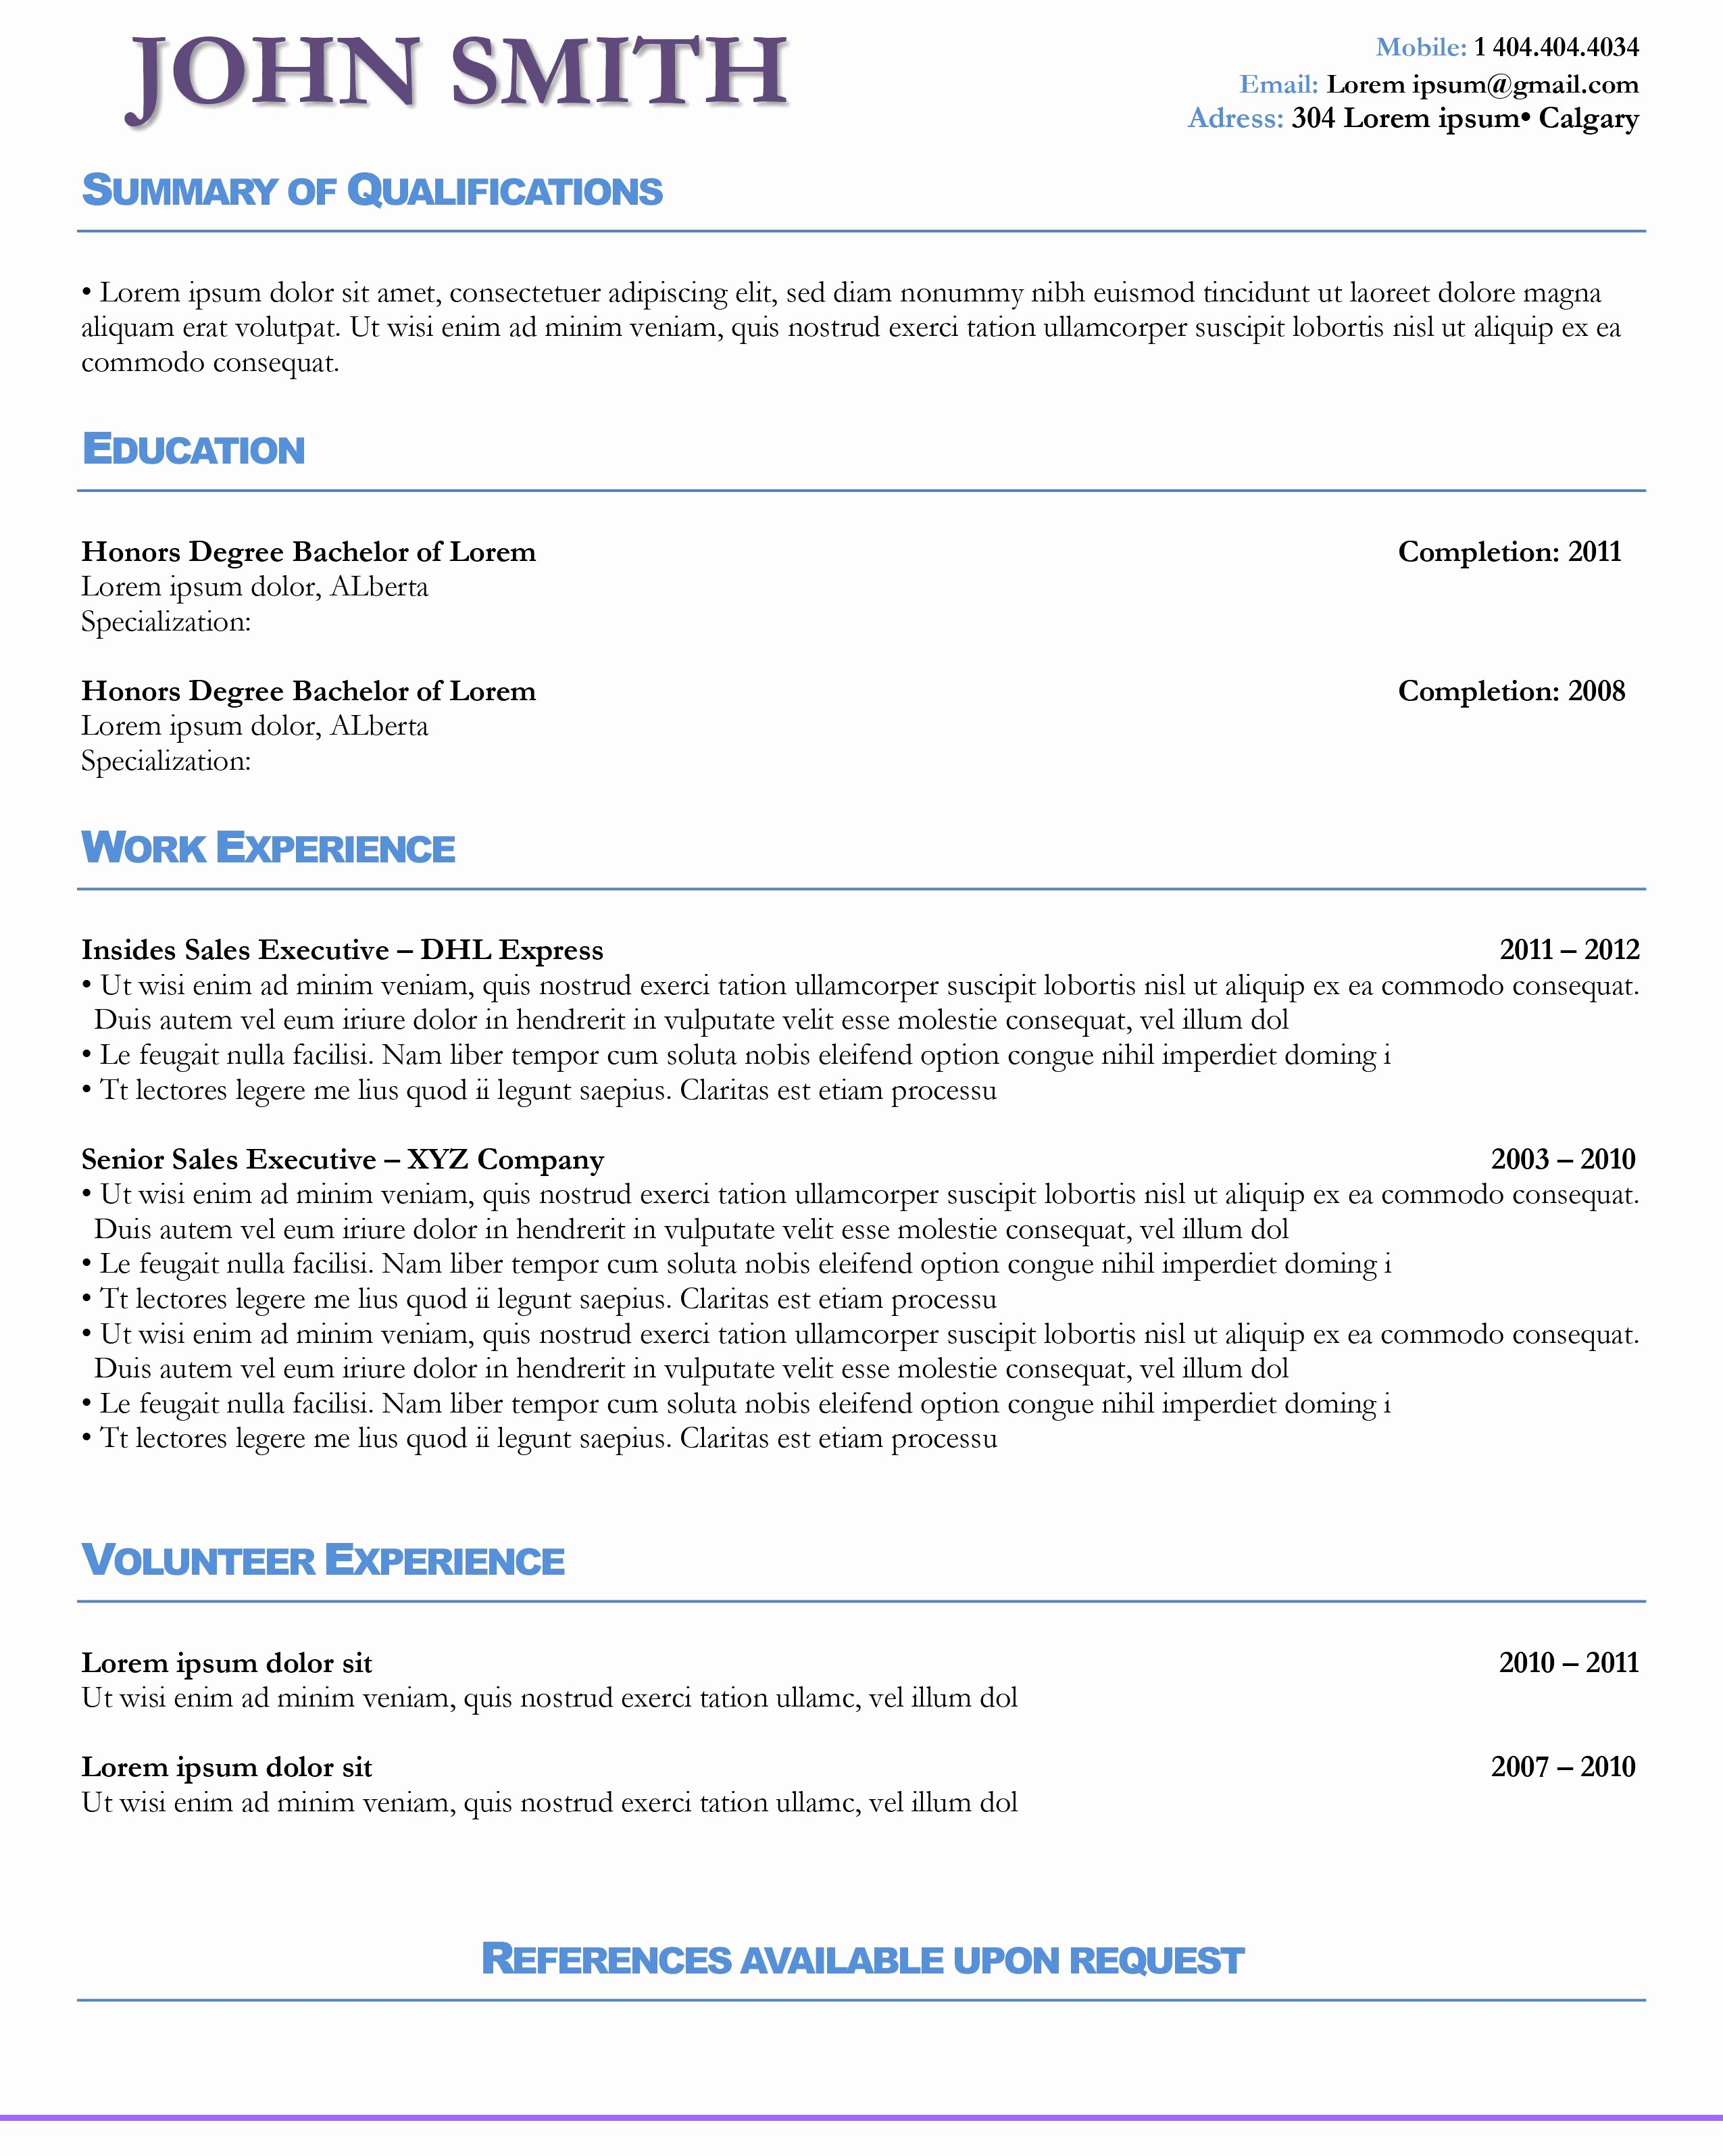 Build My Resume for Free